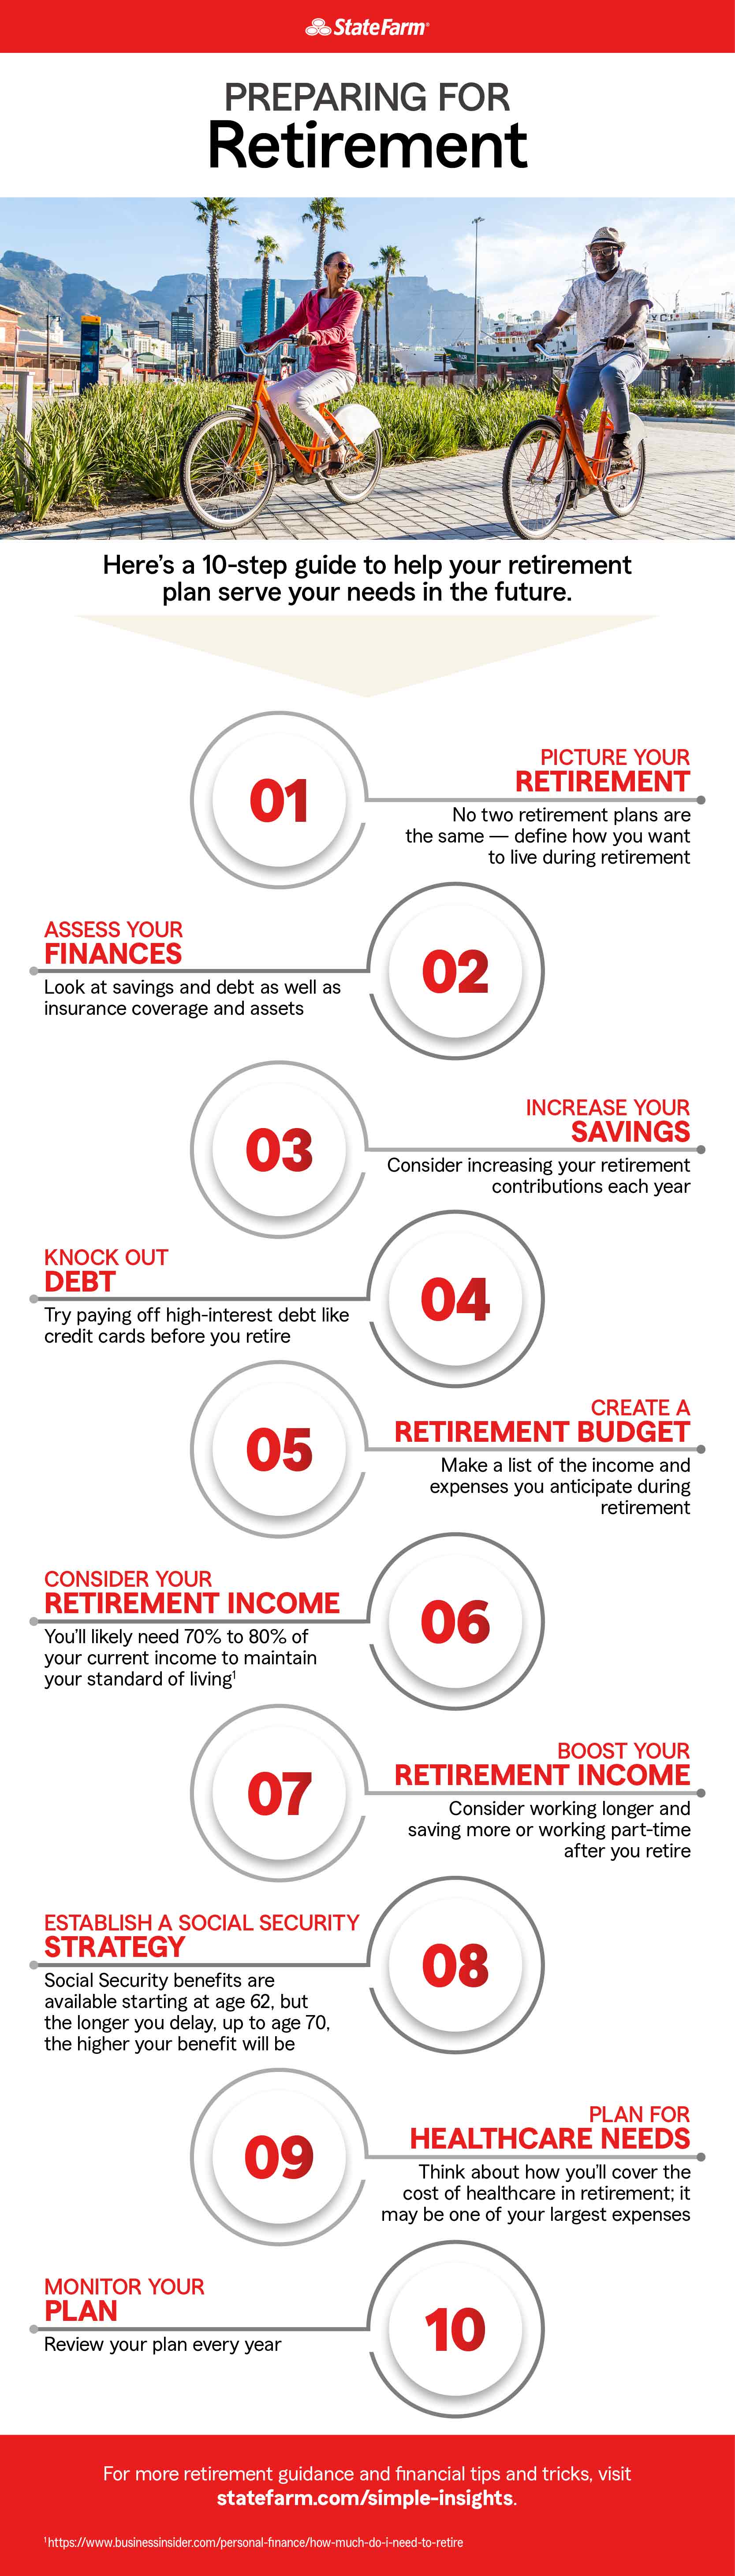 Infographic with a 10-step guide to help your plan for retirement serve your future needs.